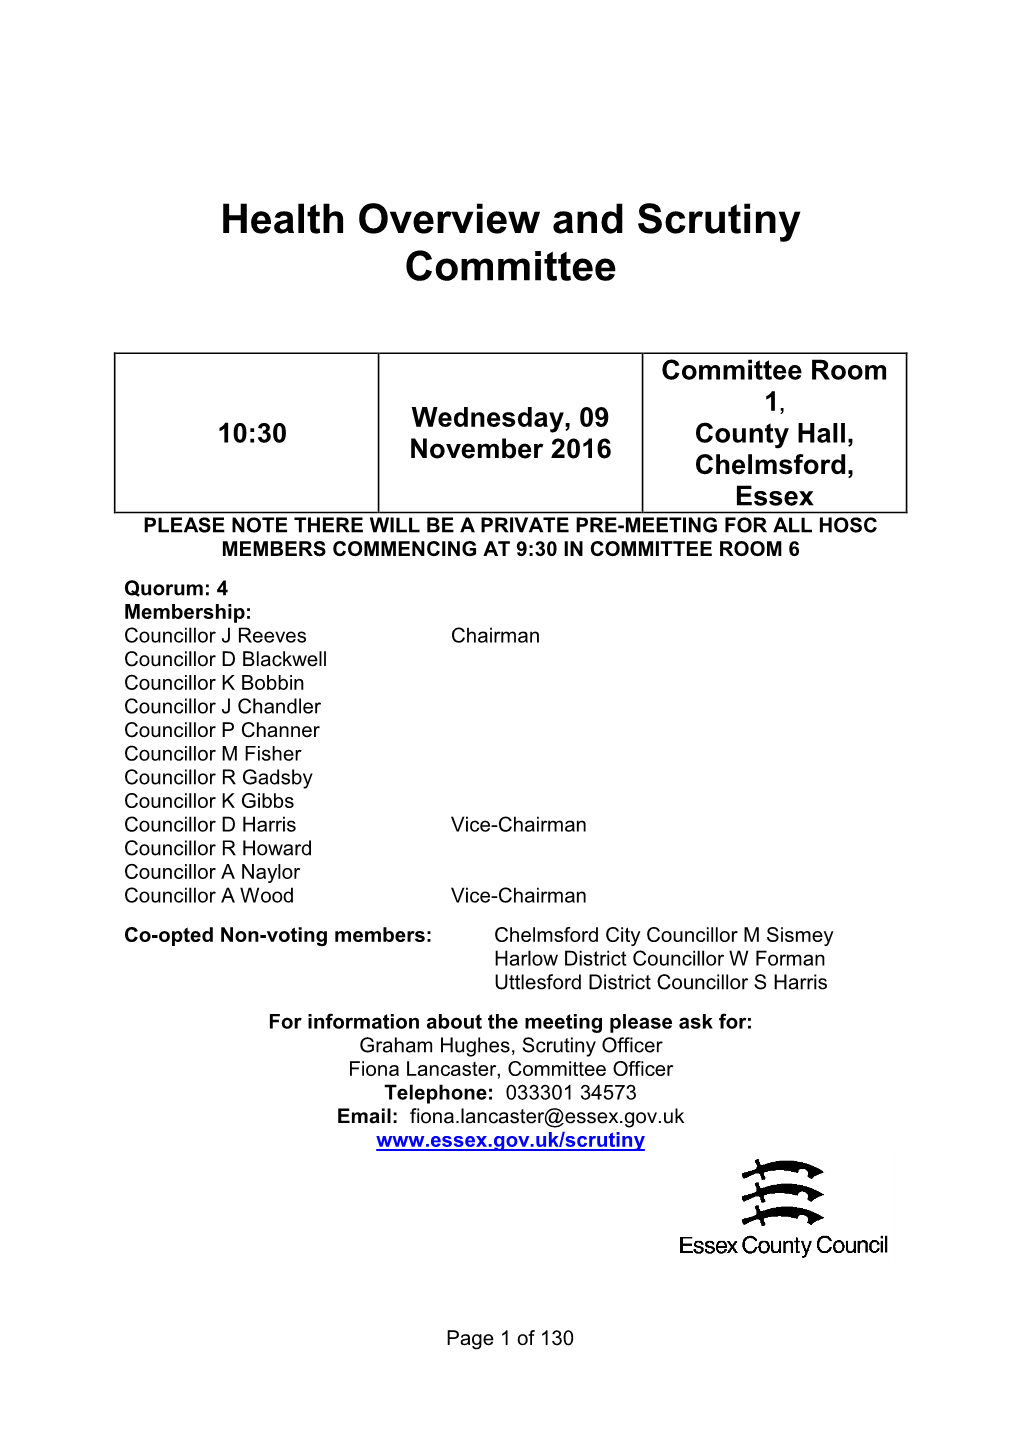 Health Overview and Scrutiny Committee